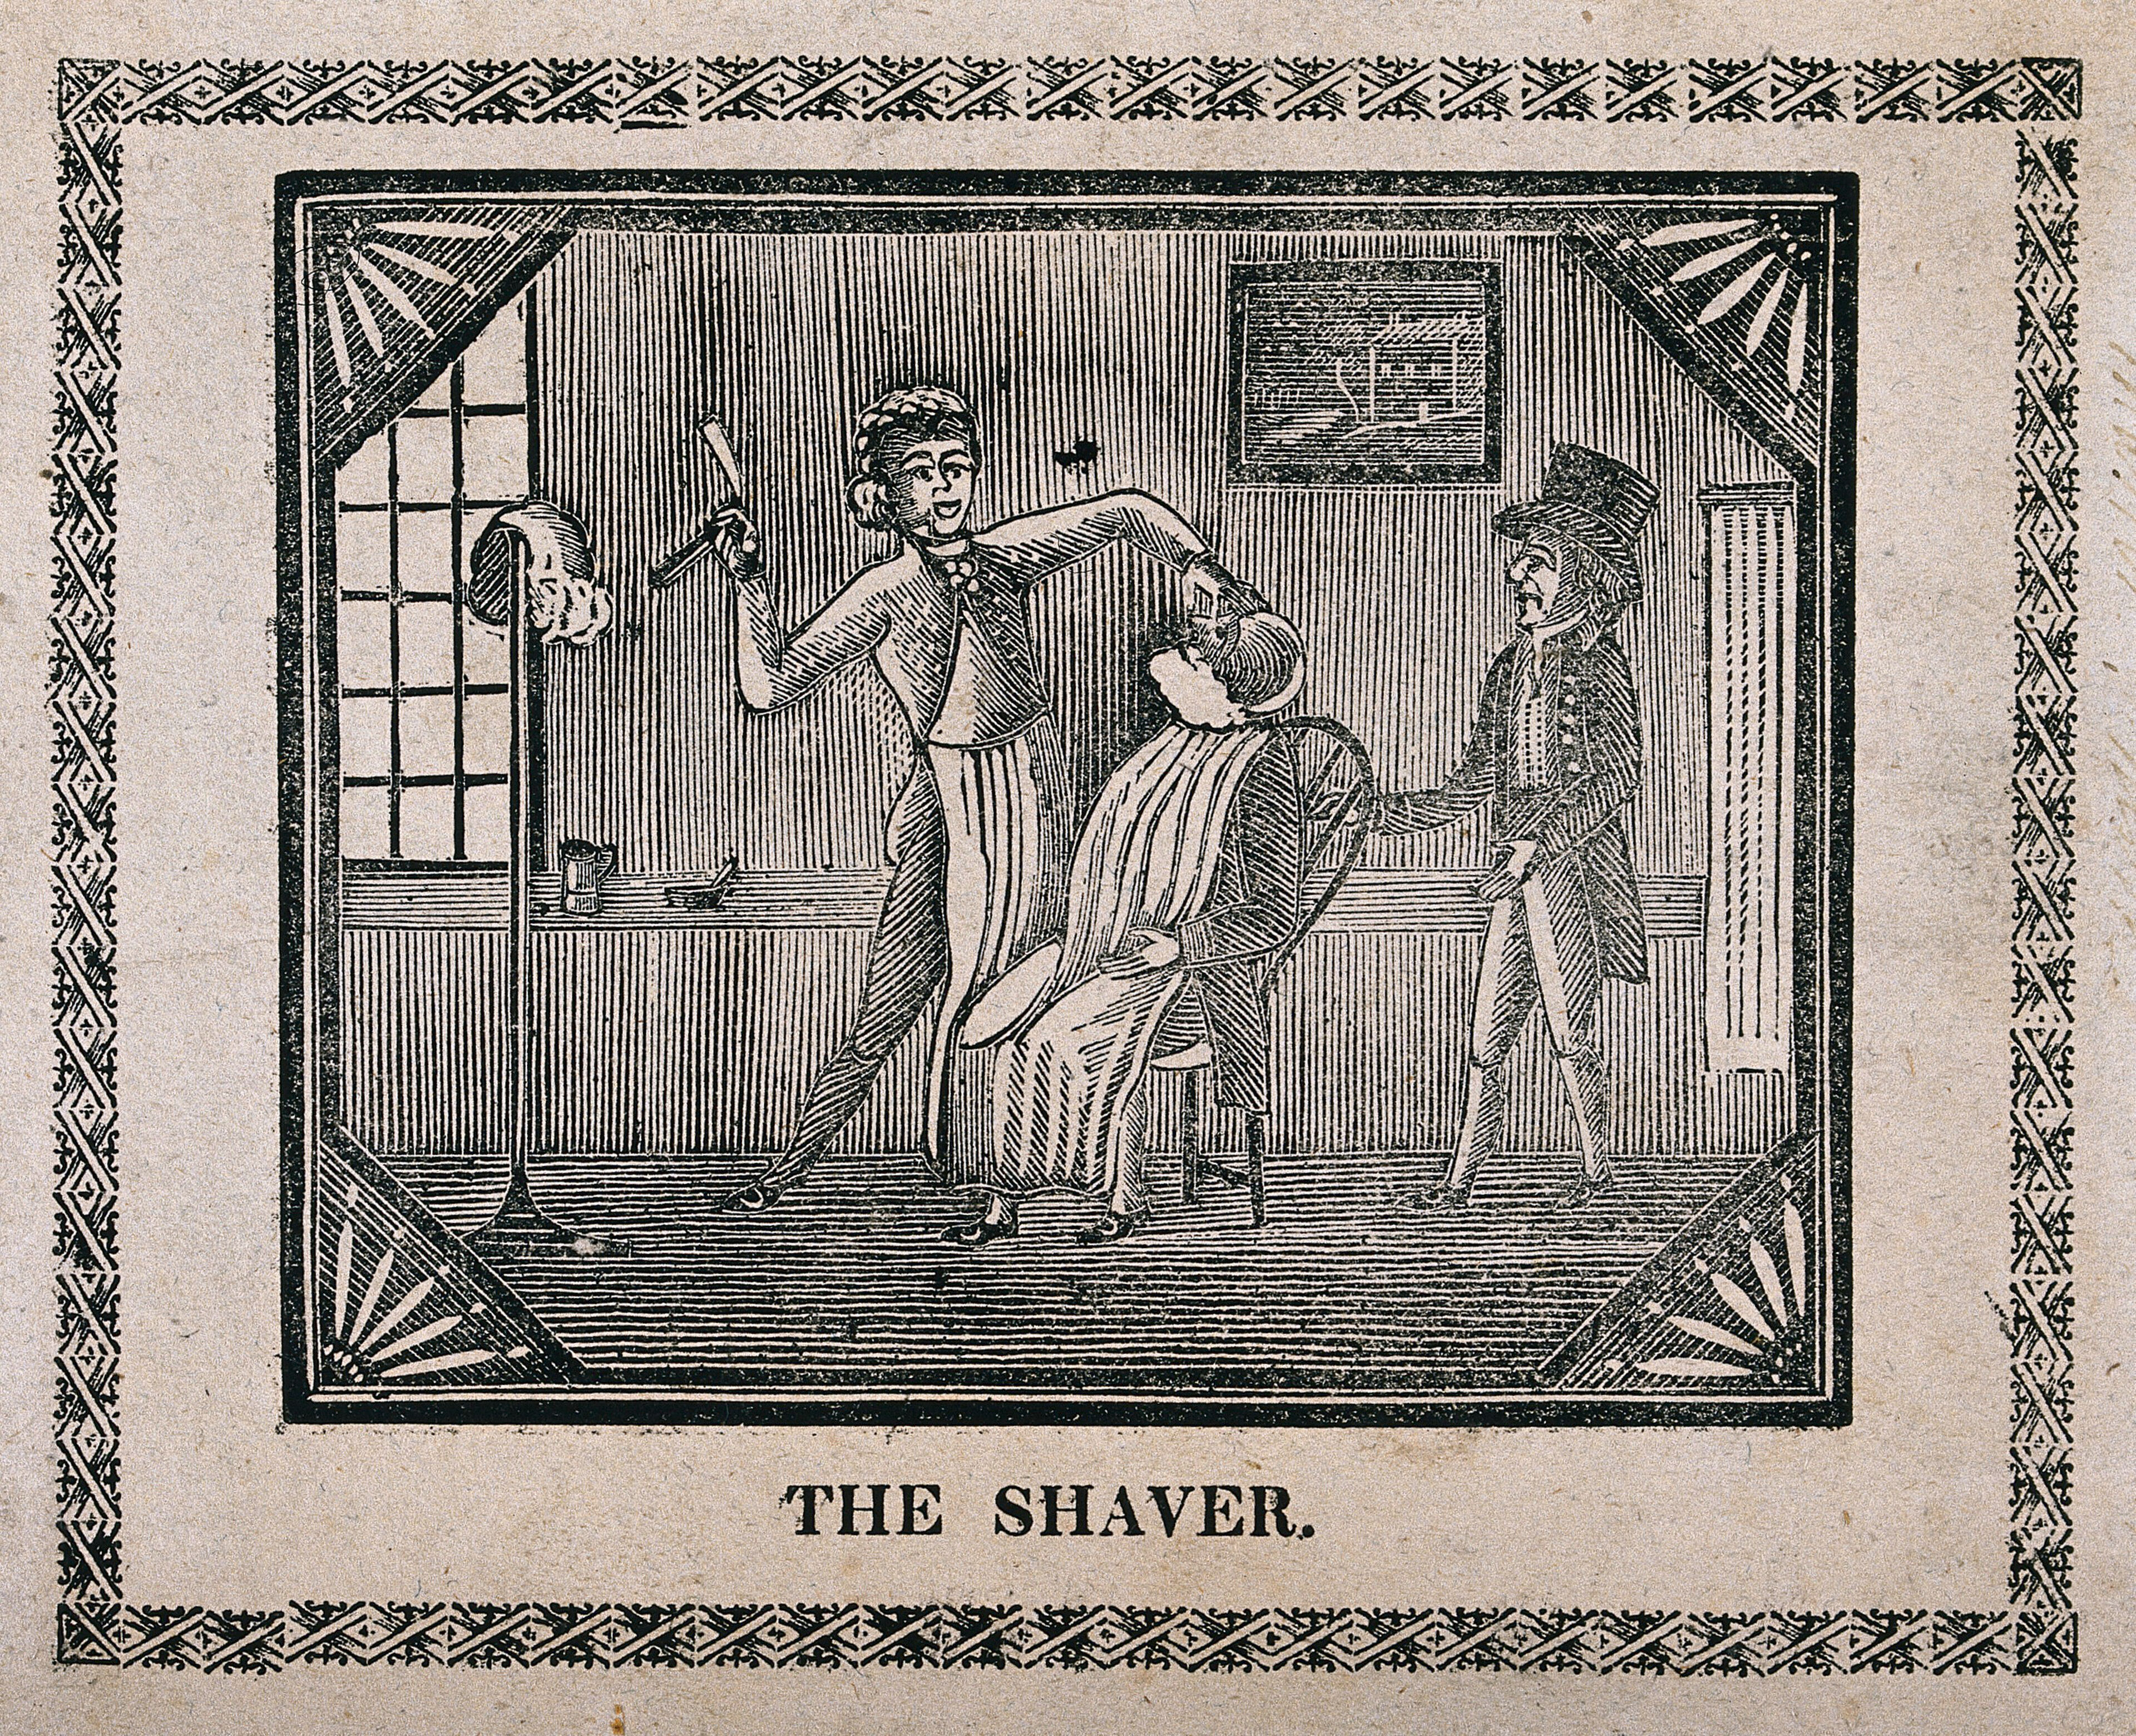 A barber shaving a man in his shop; another man looks on. Woodcut.